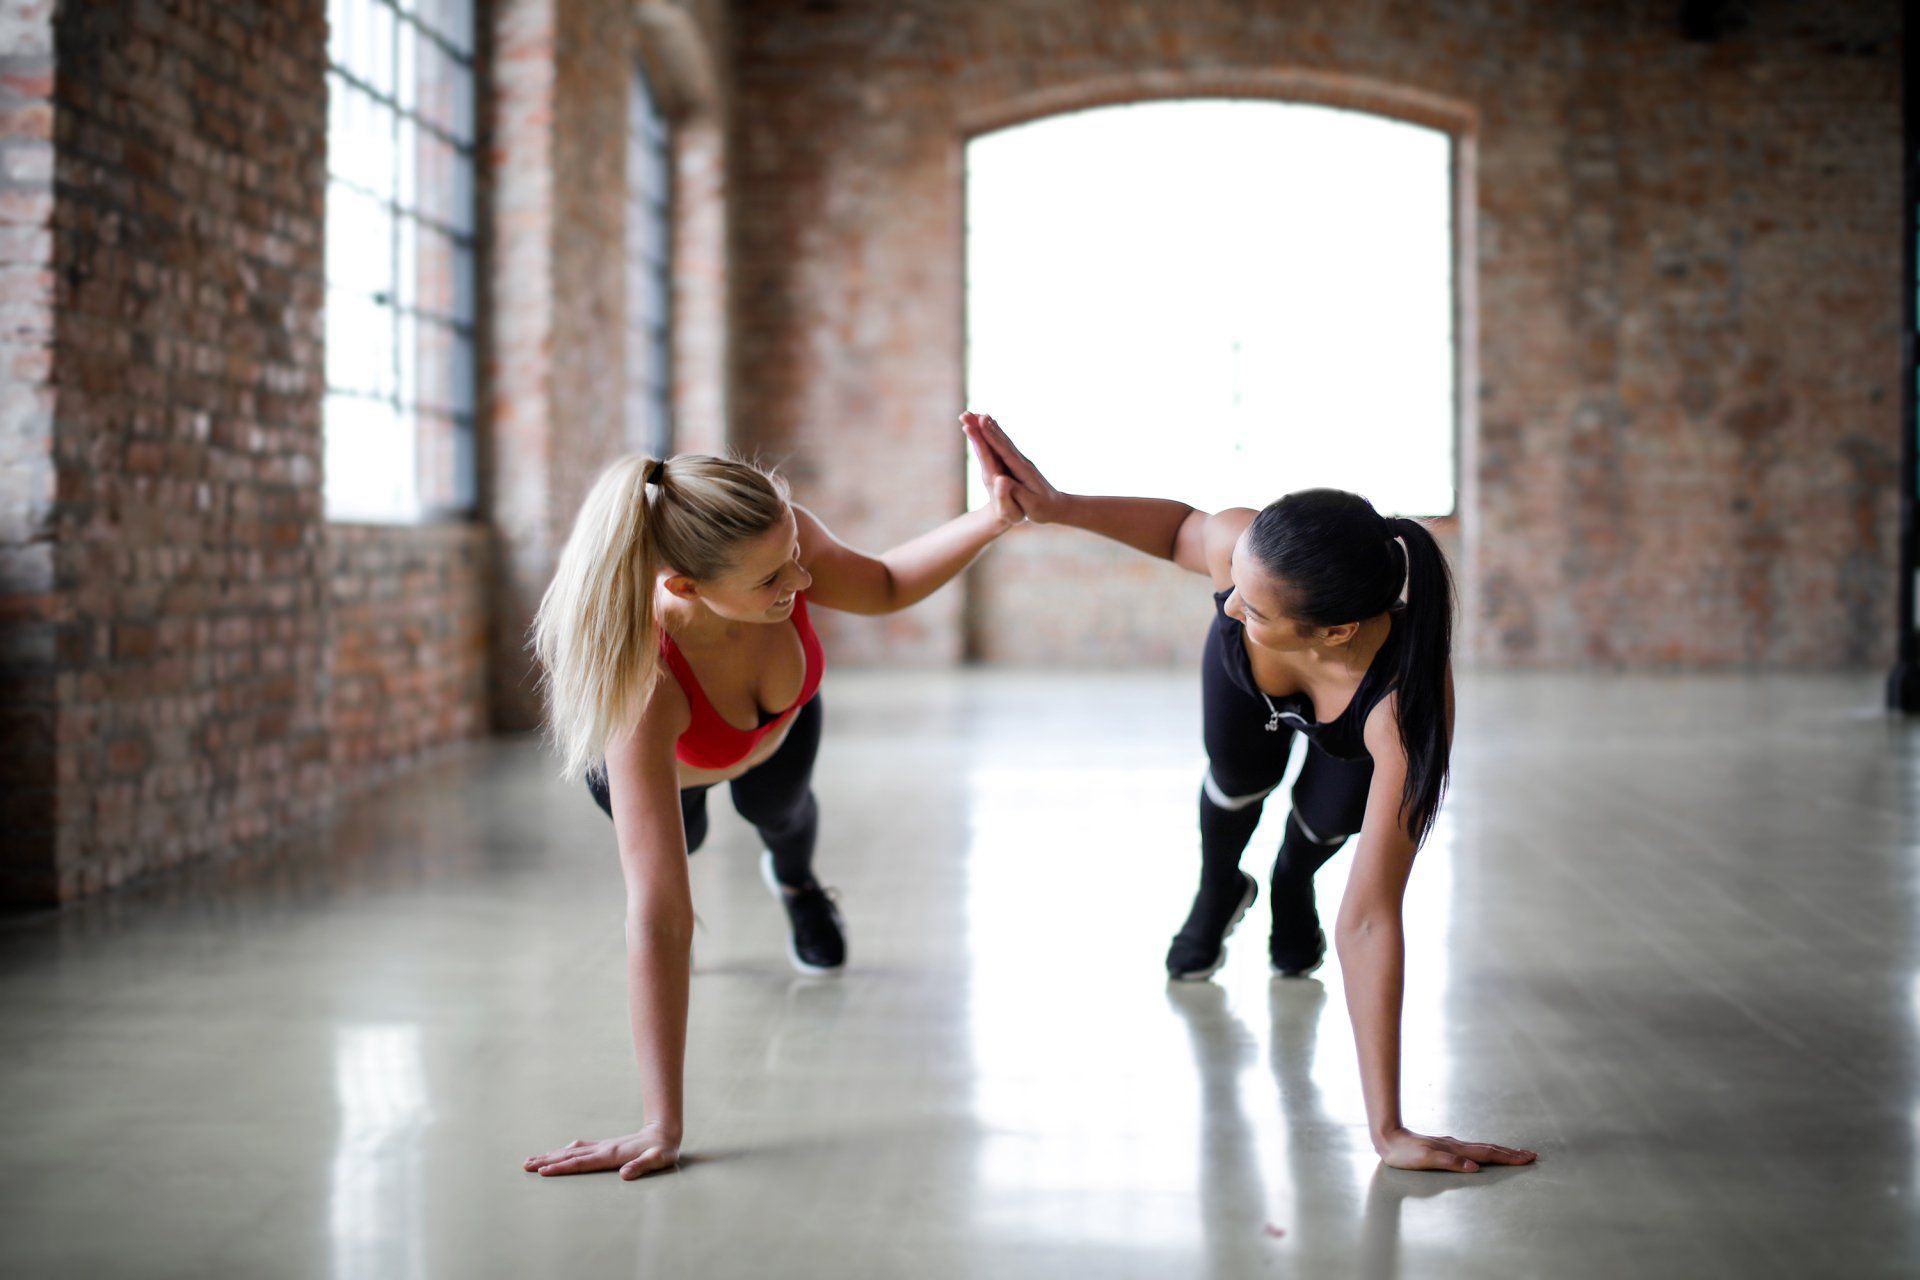 Two women are doing push ups together in a gym and giving each other a high five.